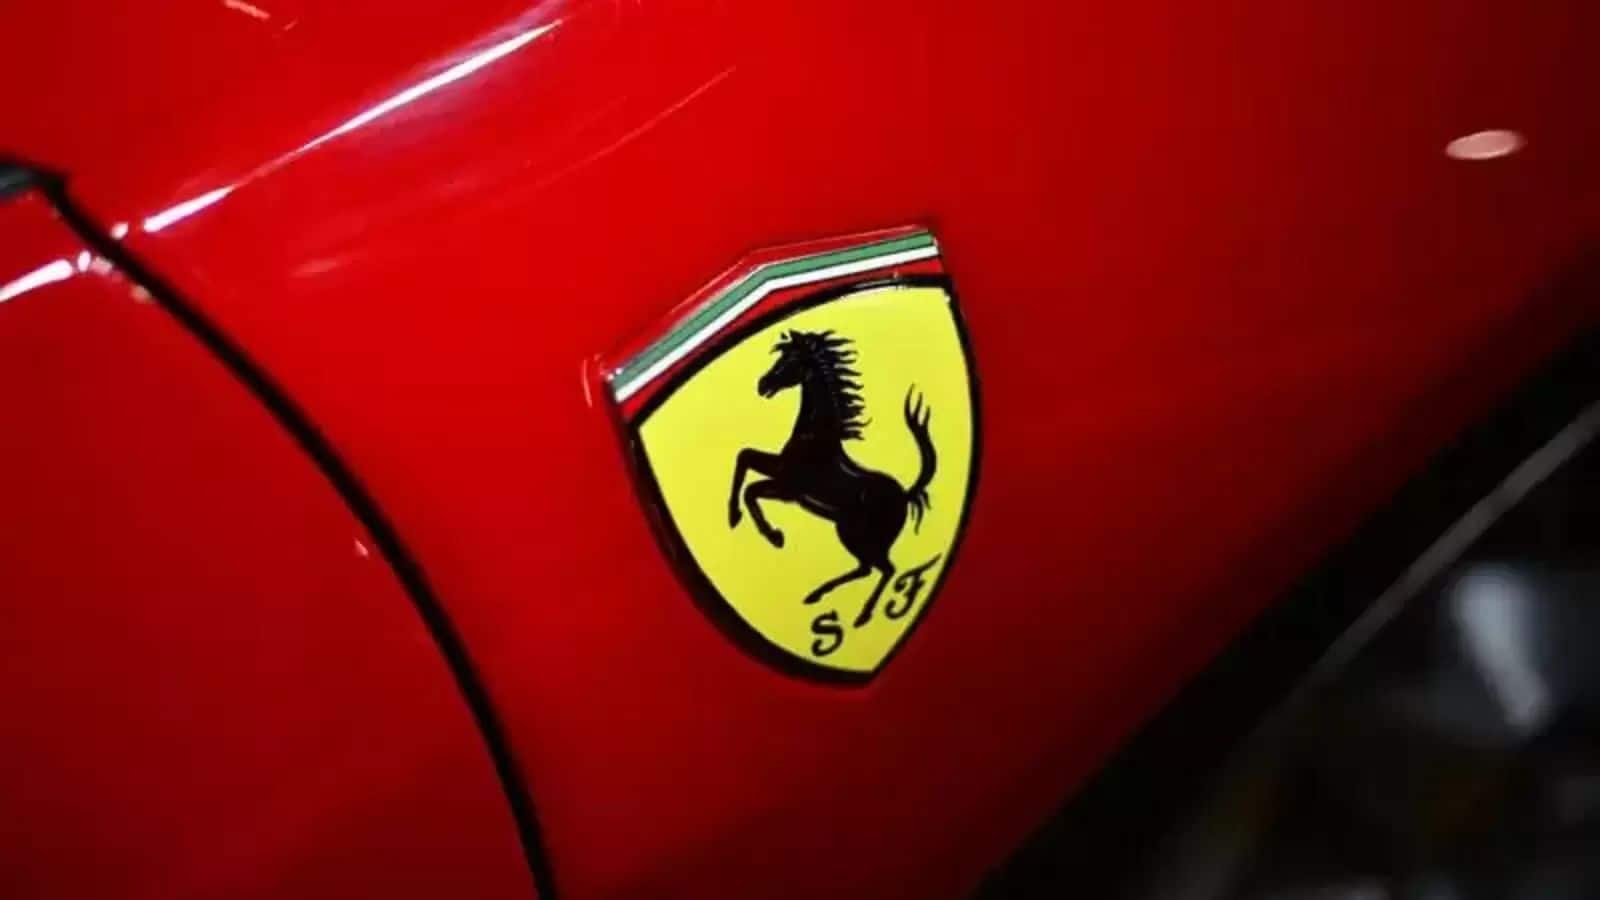 Ferrari to launch its first-ever electric car in 2025